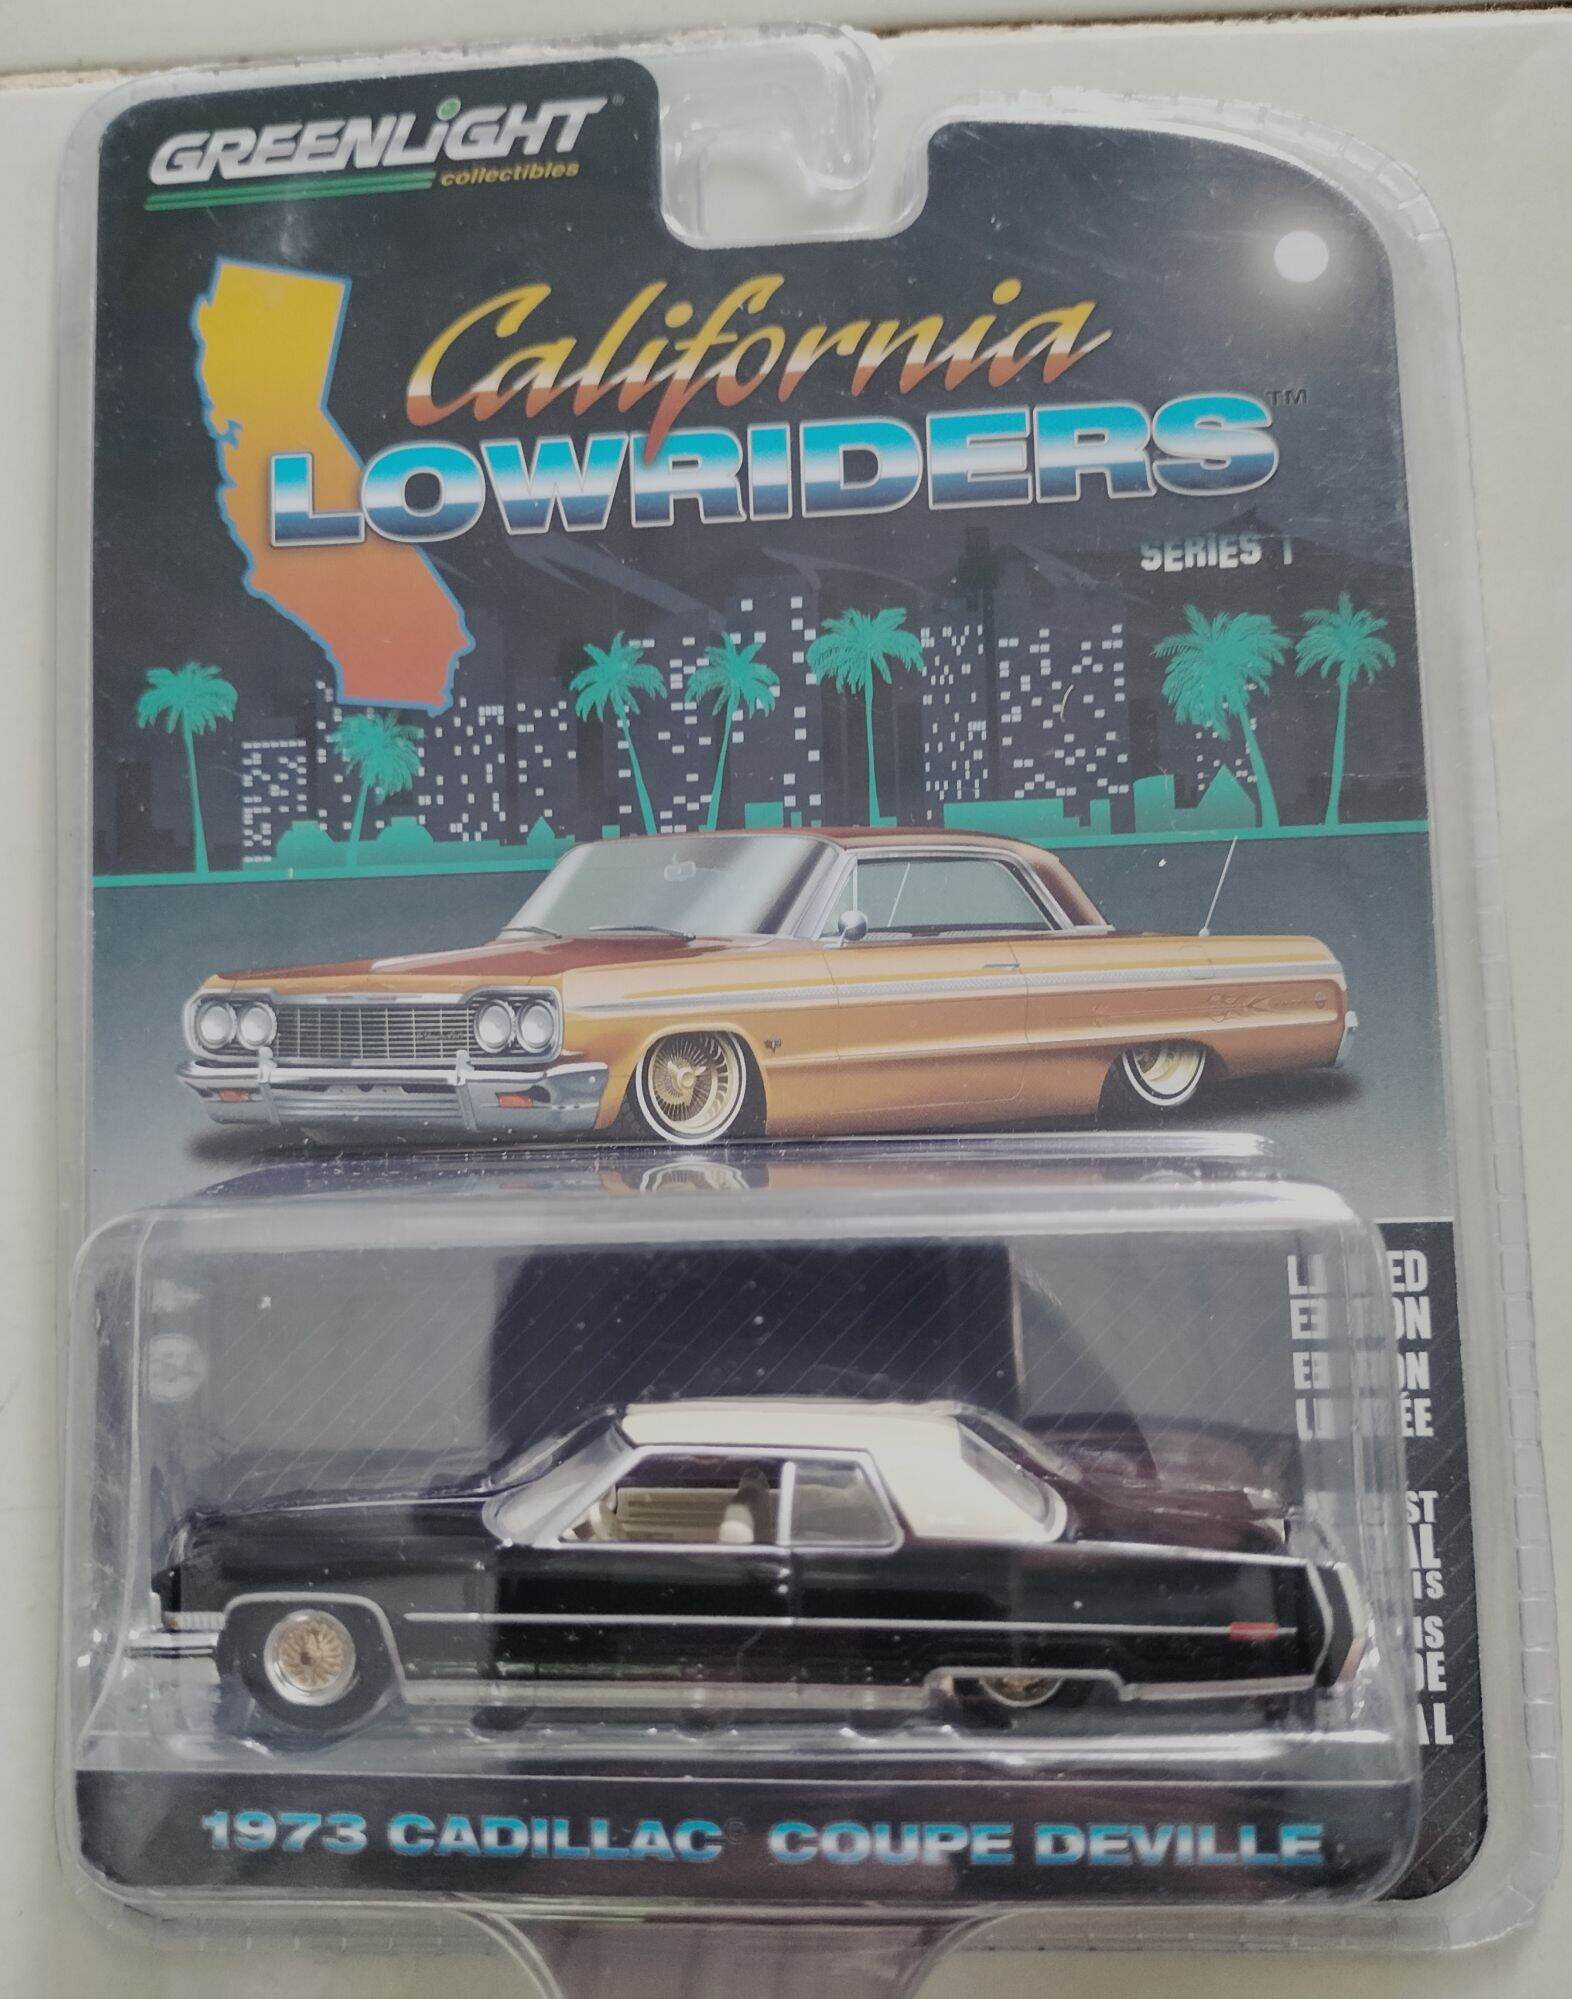 Xe mô hình Greenlight California lowriders 1973 Cadillac coupe deville